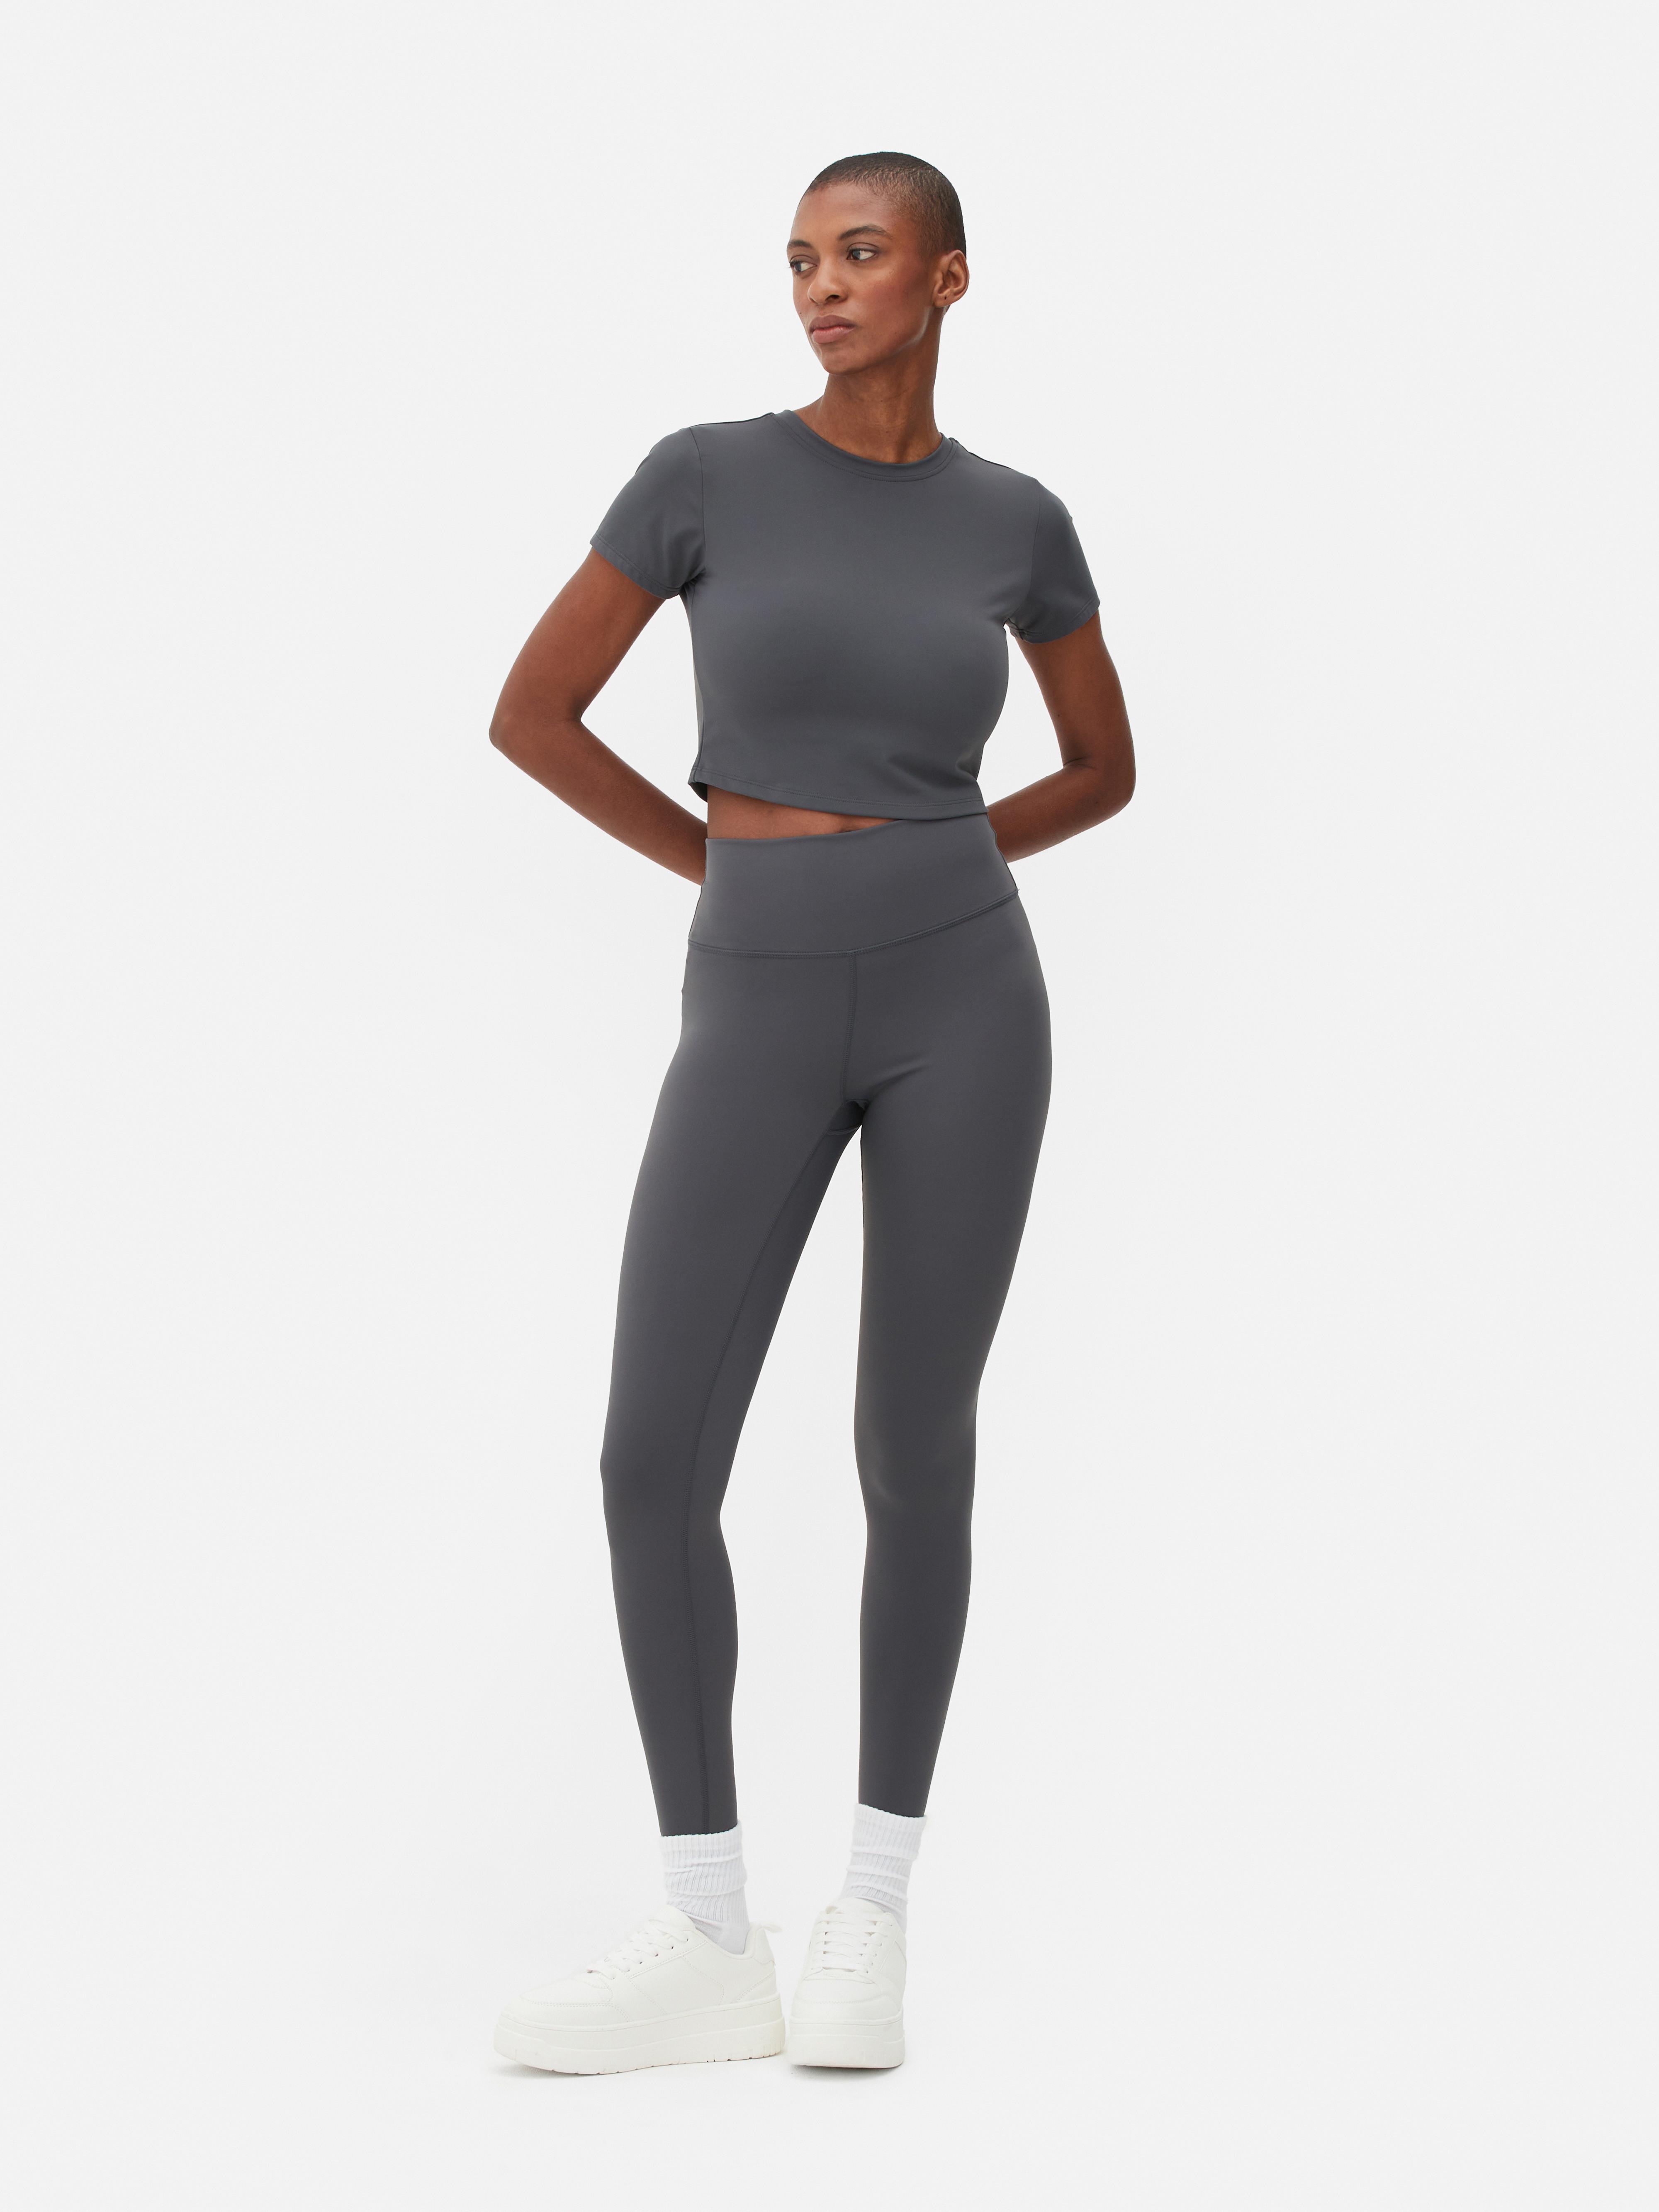 Women's Activewear, Gym Clothes & Activewear Sets